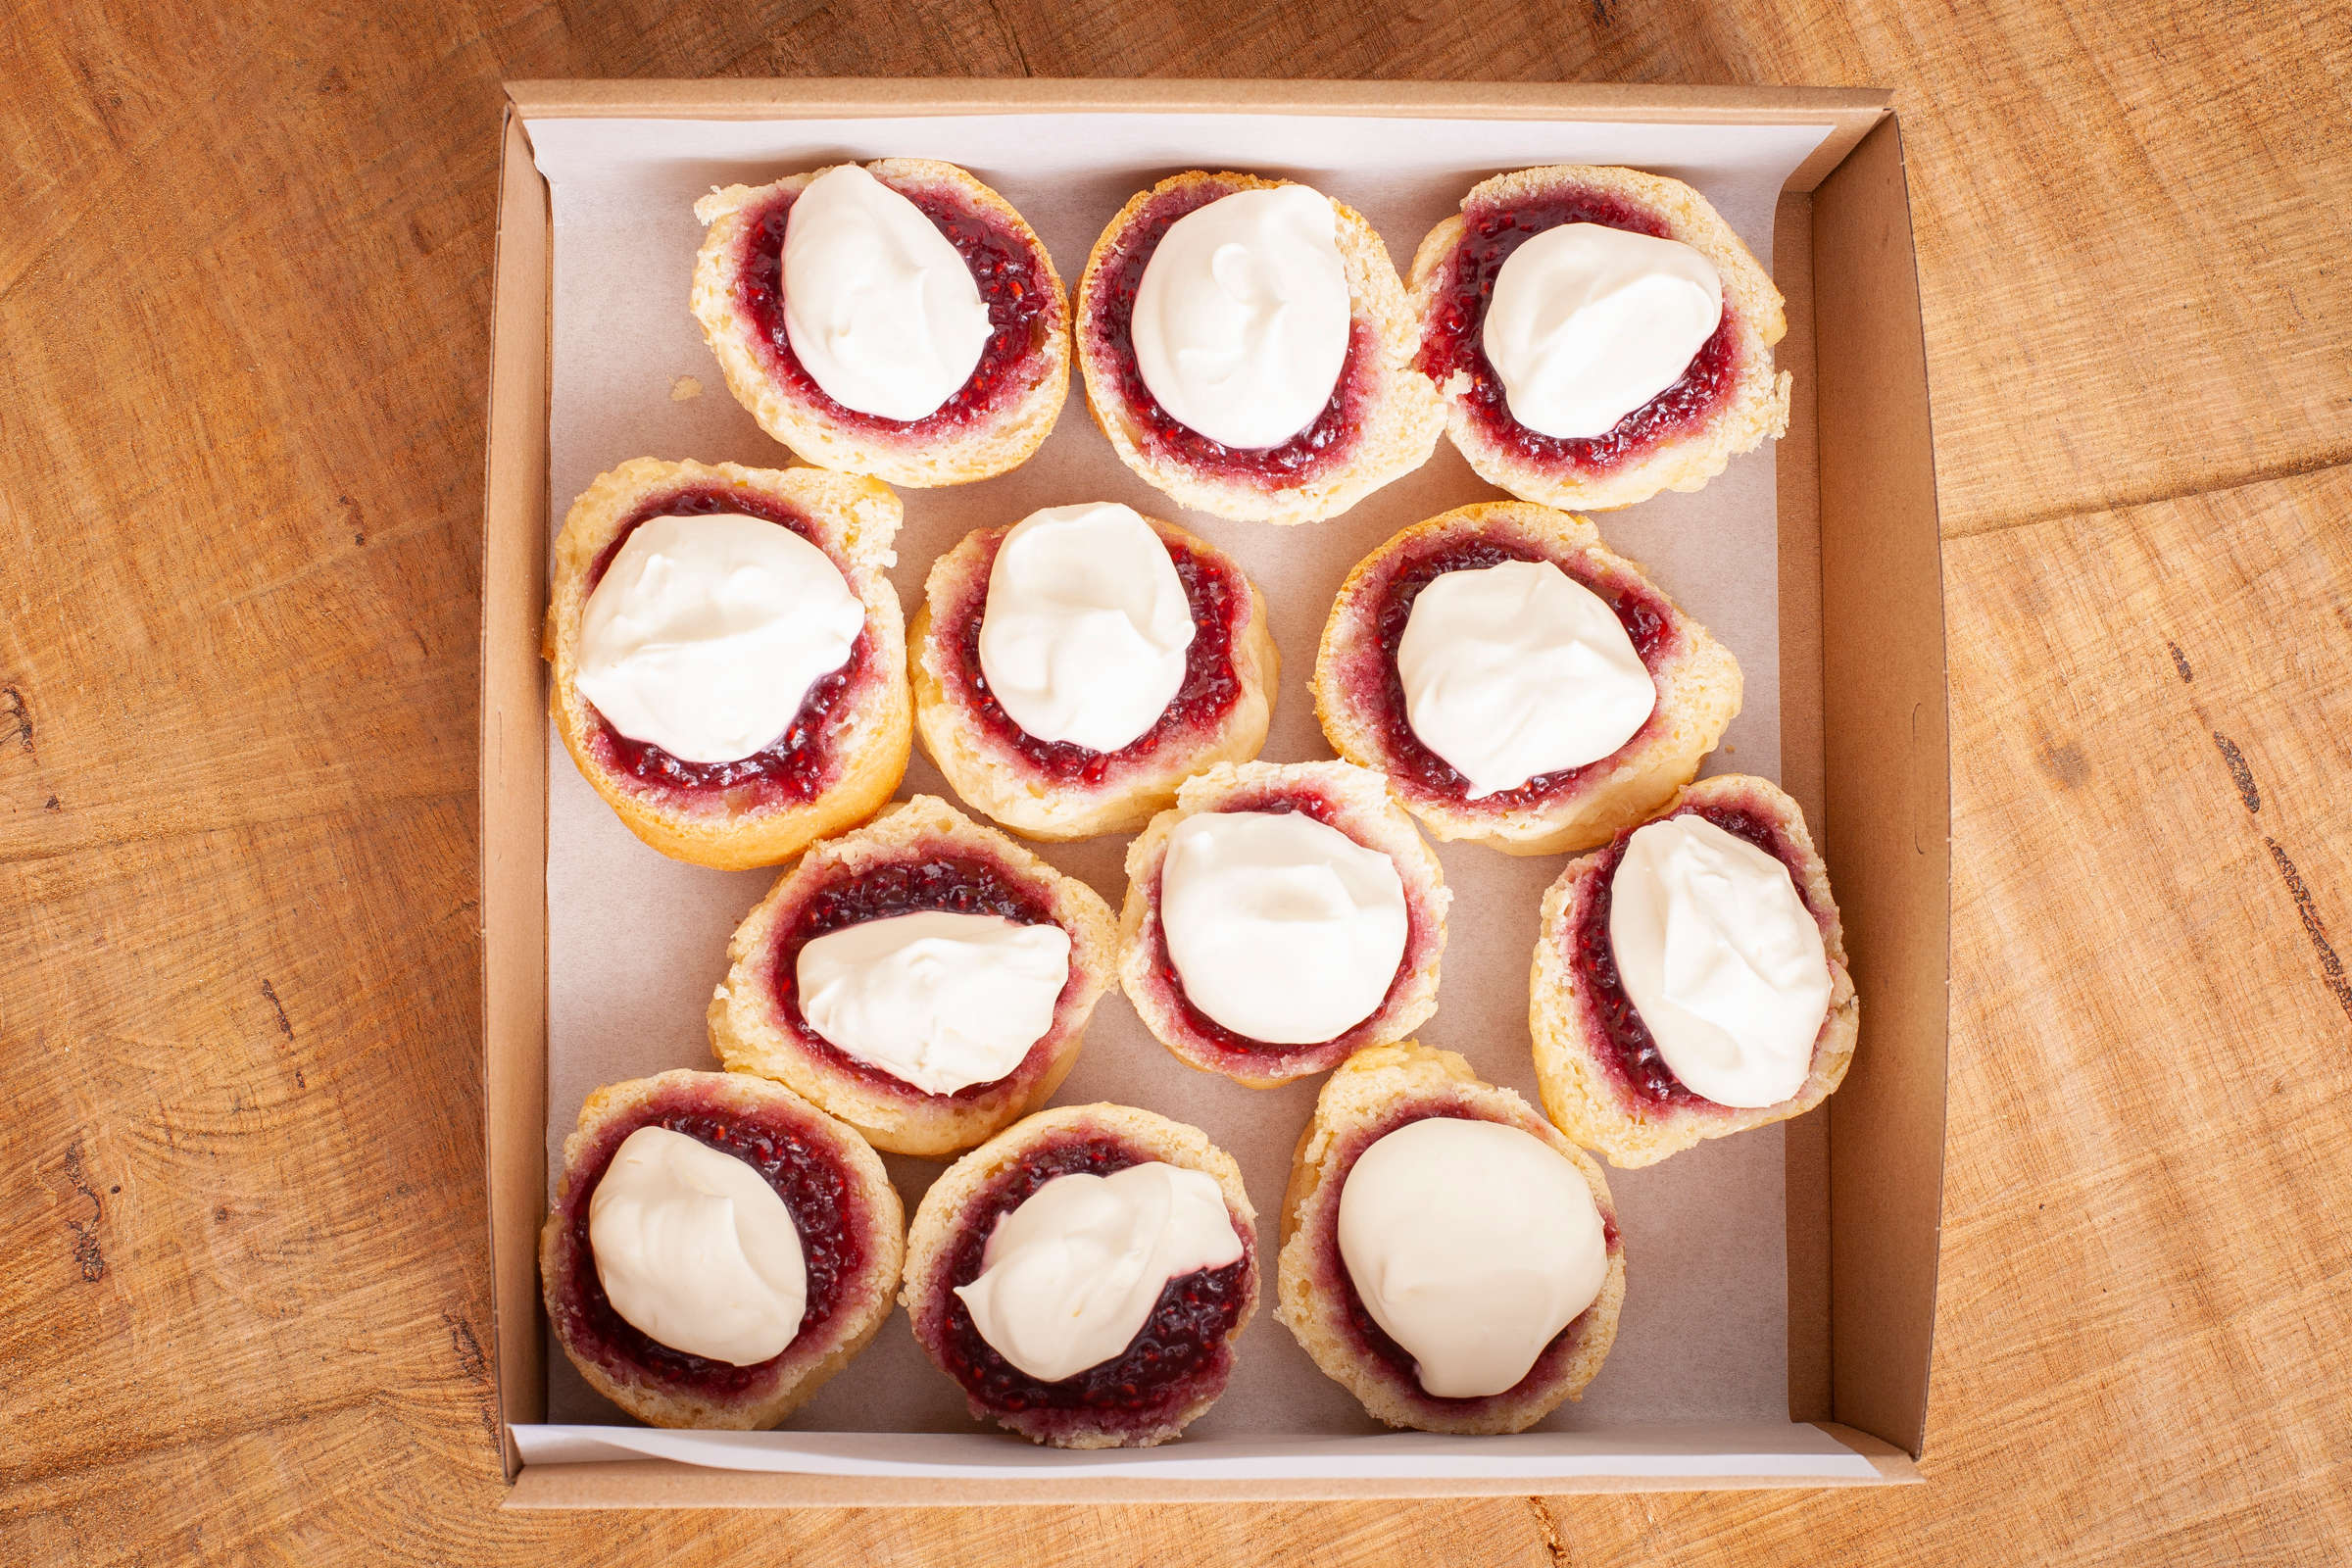 Scones with house-made berry jam and Ashgrove cream catering box. Credit: Richard Jupe.